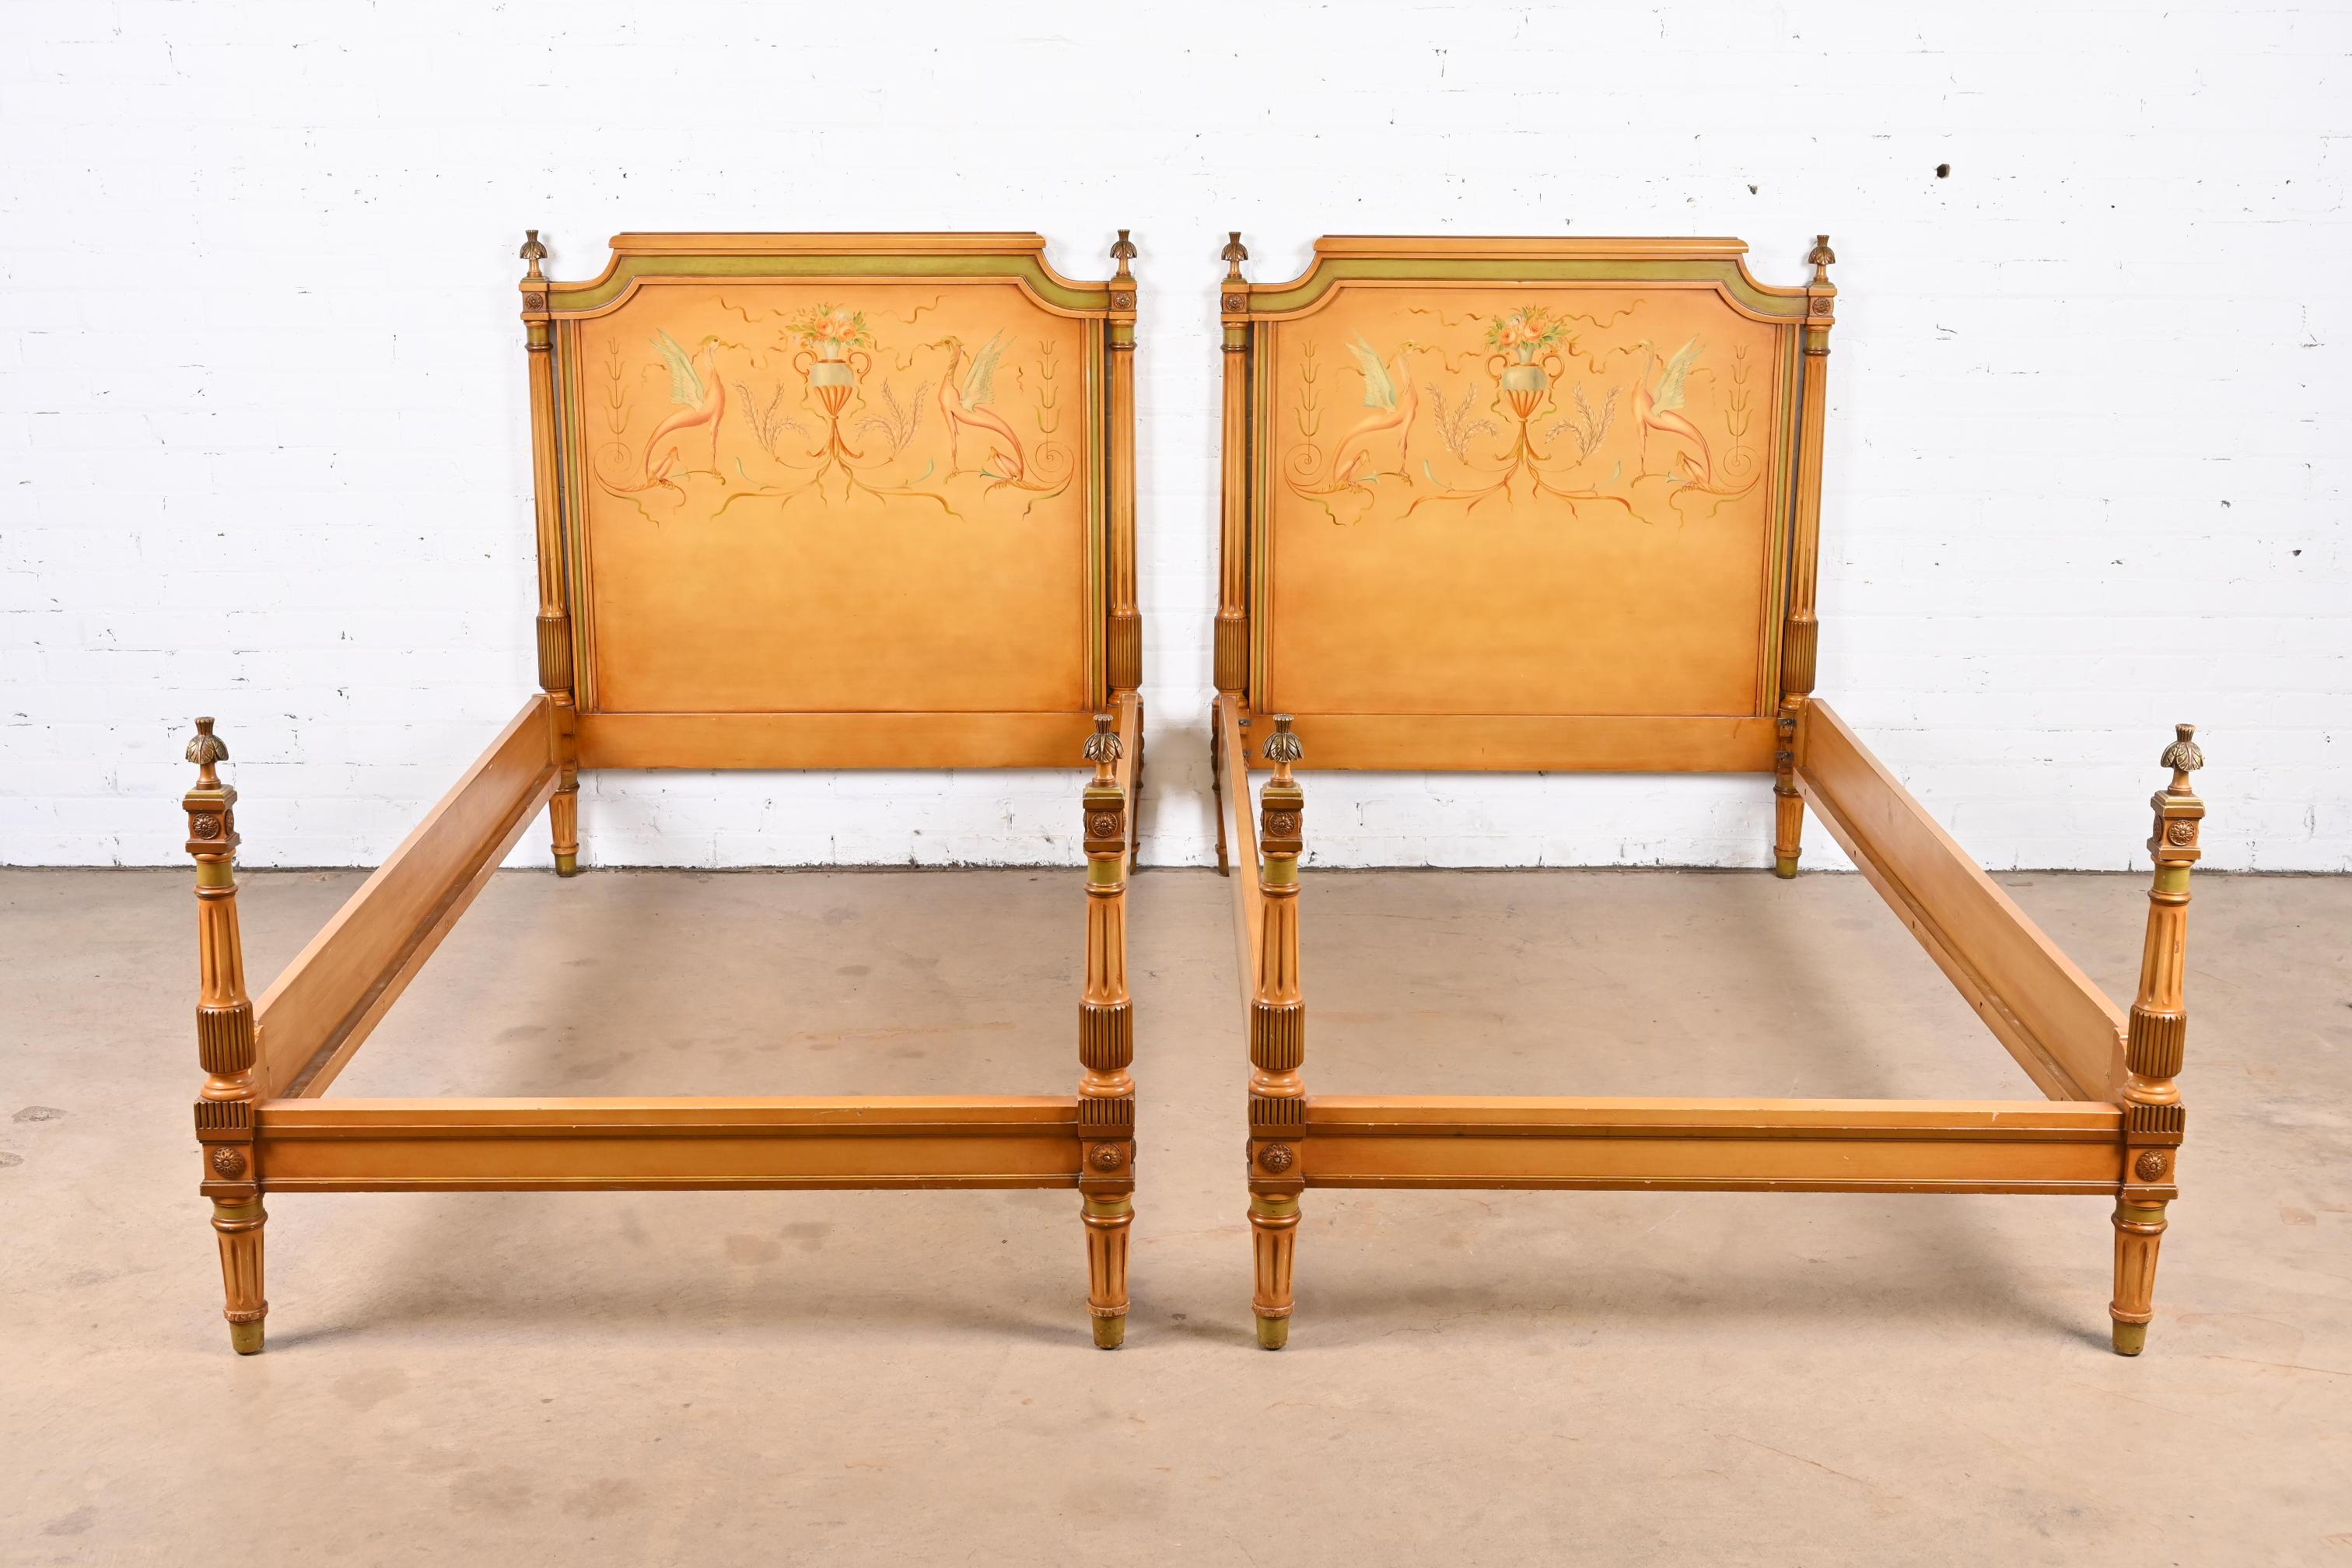 A gorgeous pair of Neoclassical or Louis XVI style twin beds

In the manner of Grosfeld House

USA, Circa 1920s

Carved mahogany frames, with painted and gilt details.

Measures: 42